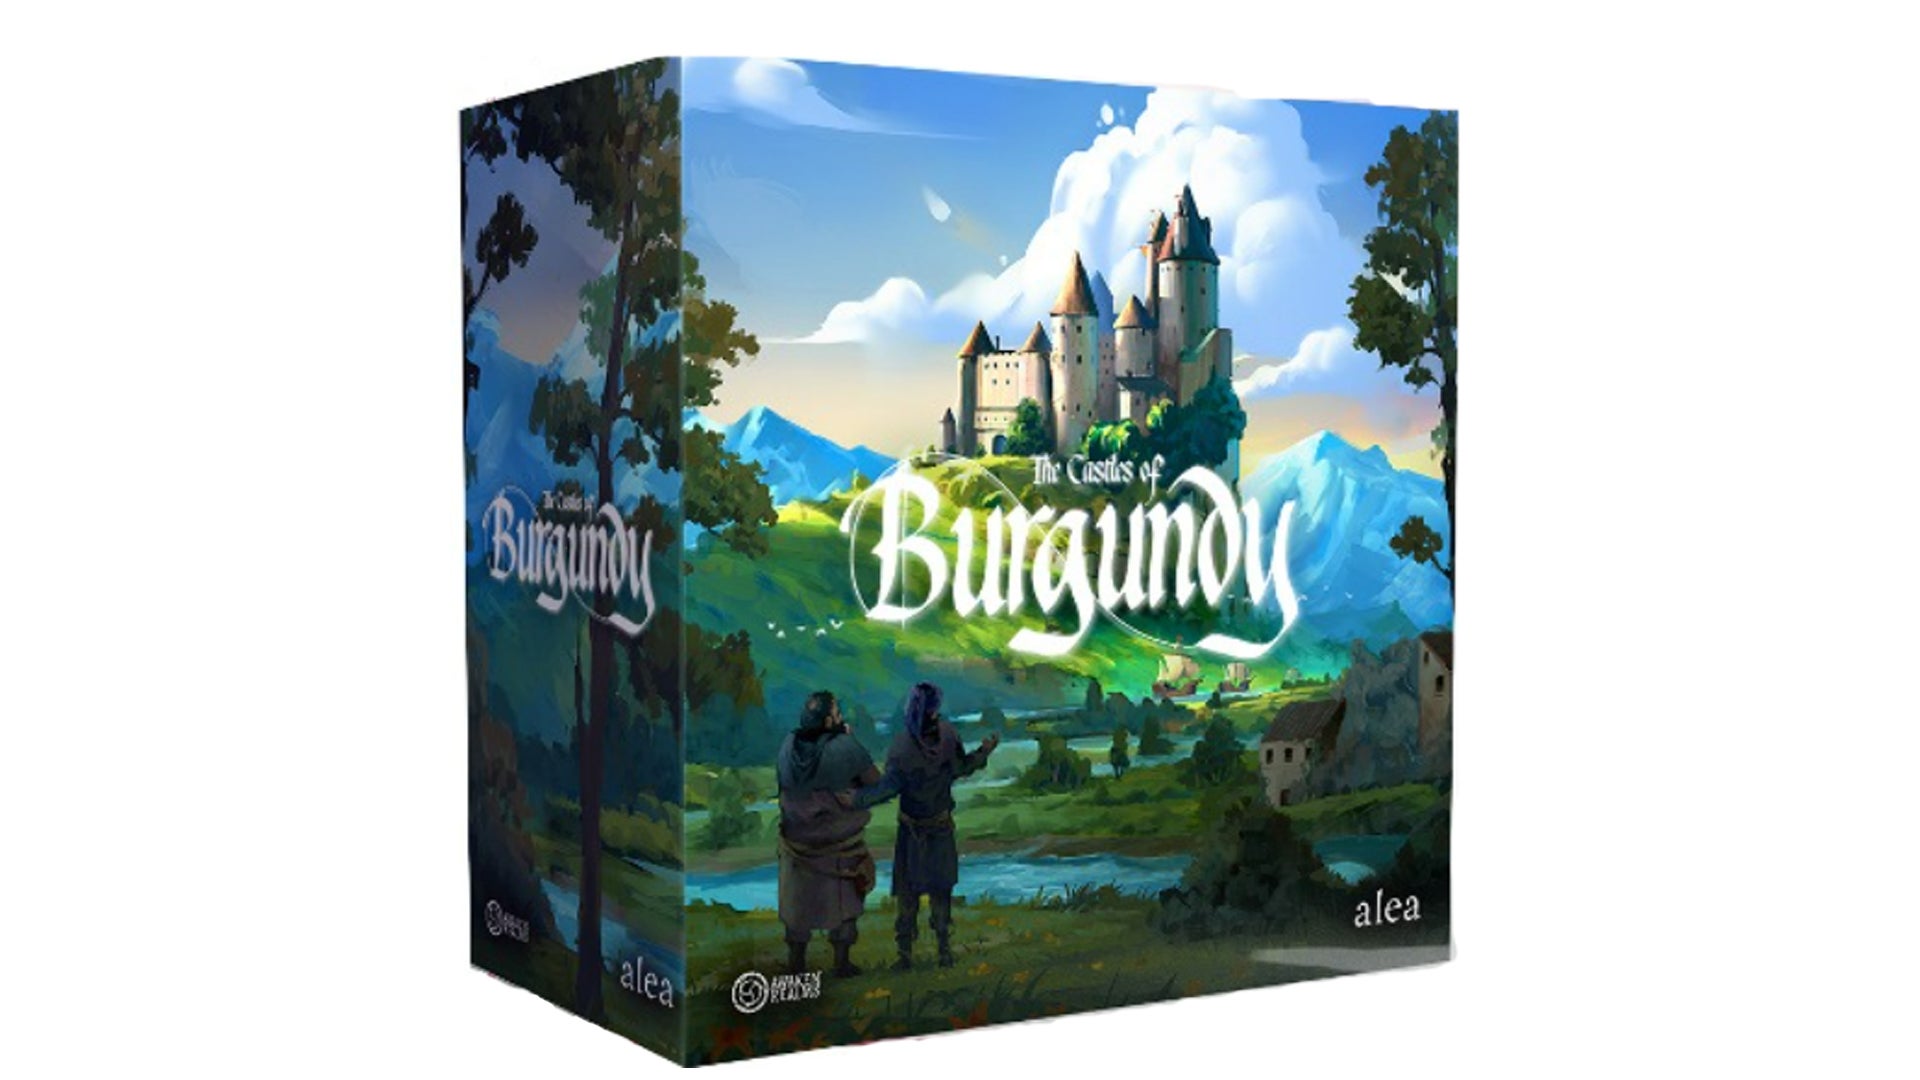 A Castles of Burgundy reprint is coming to Gamefound this spring